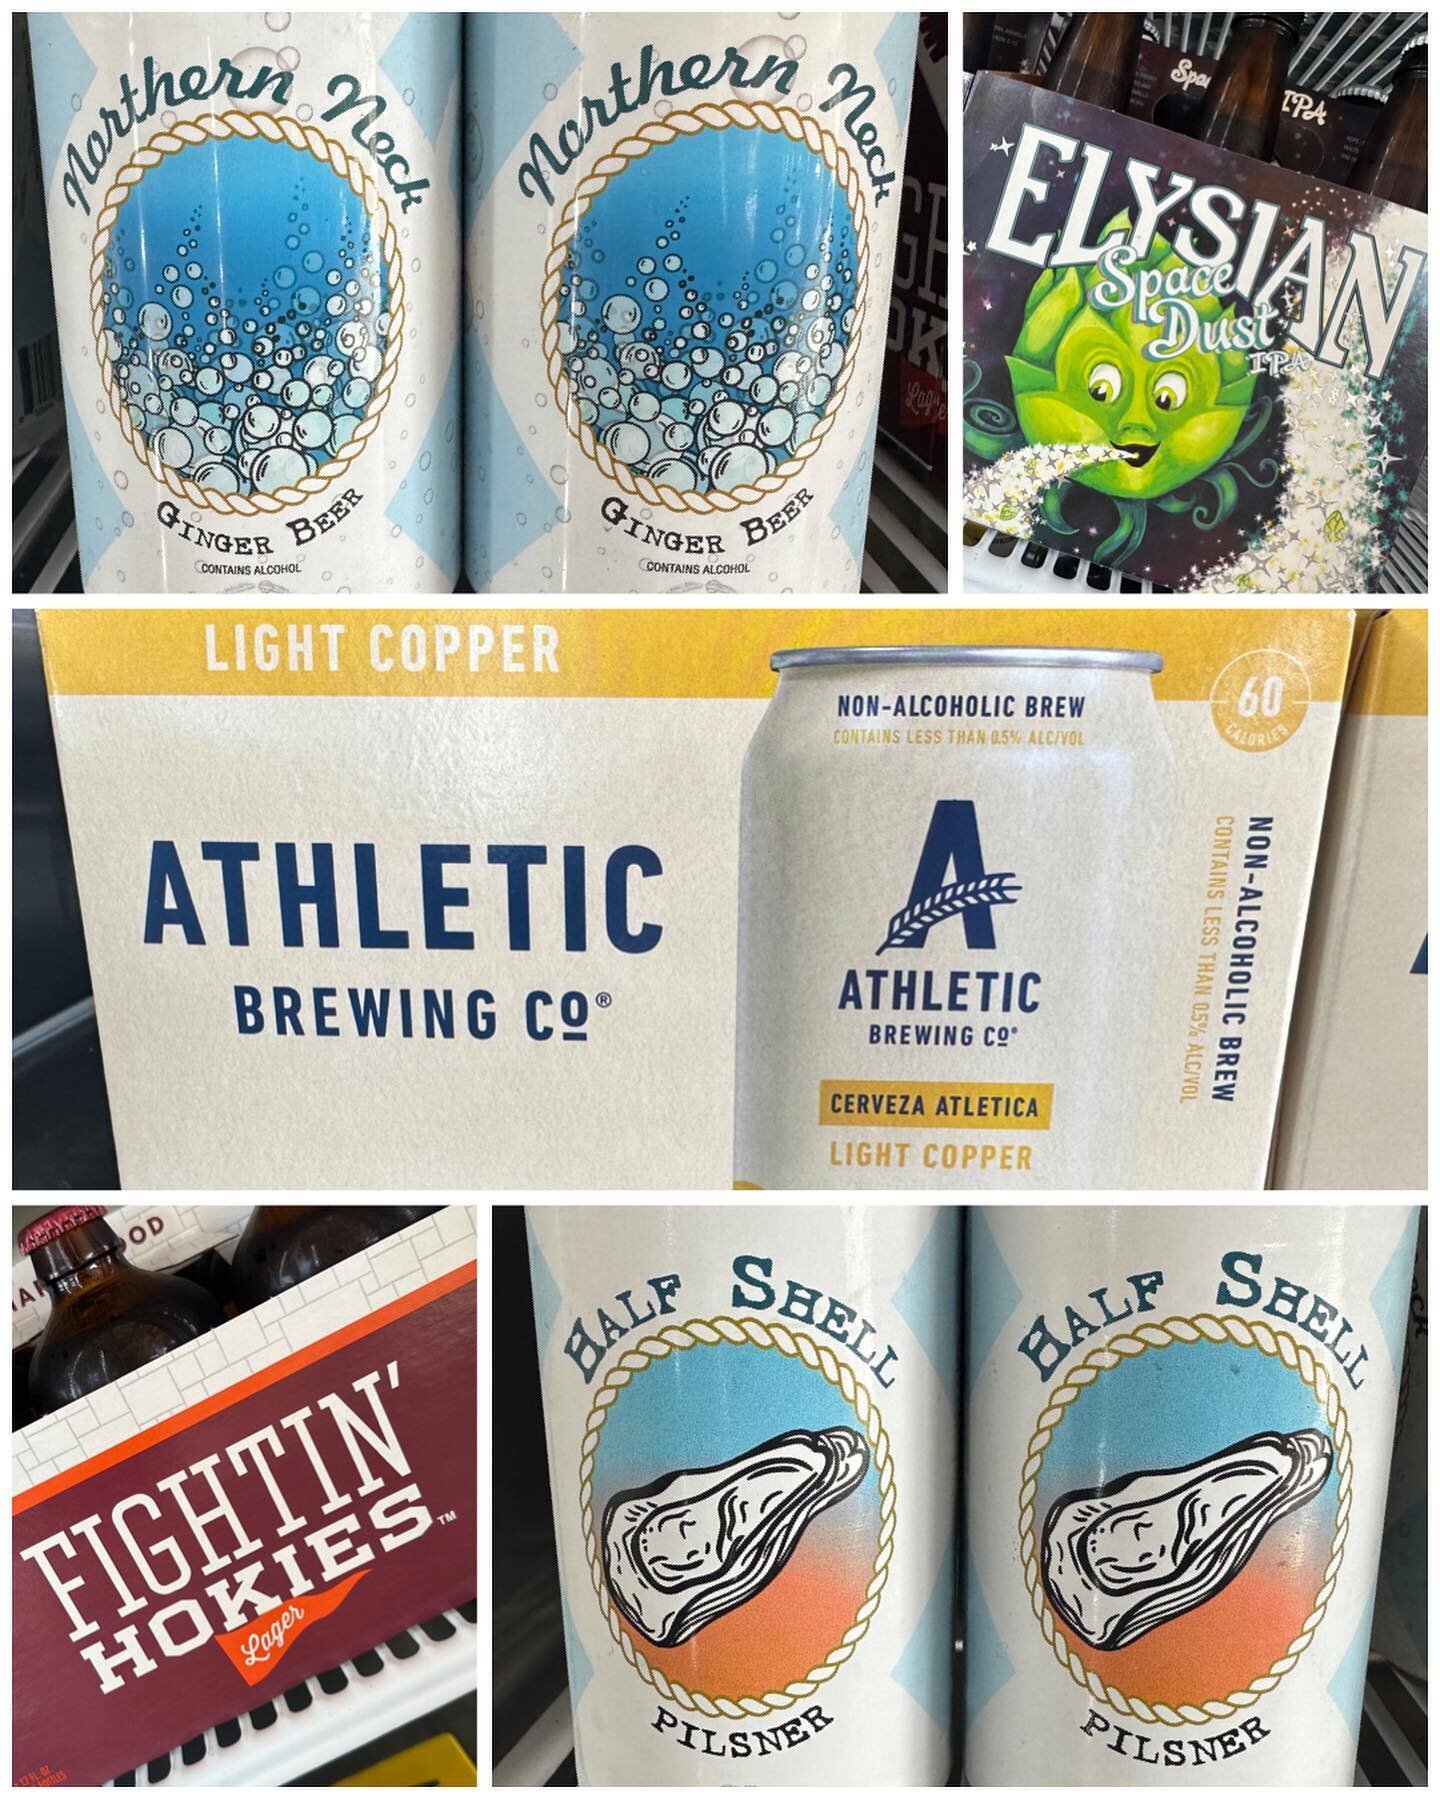 🍻 Game Day Go-To&rsquo;s 🏈 Grab your beer &amp; snacks in the market! 🥜

Find craft beer in the fridge:
🦪 Dividing Creek Half Shell Pilsner
🫚 Dividing Creek NNK Ginger Beer
✨ Elysian Space Dust IPA
🦃 Fightin&rsquo; Hokies Lager
🌾 N.A. Athletic